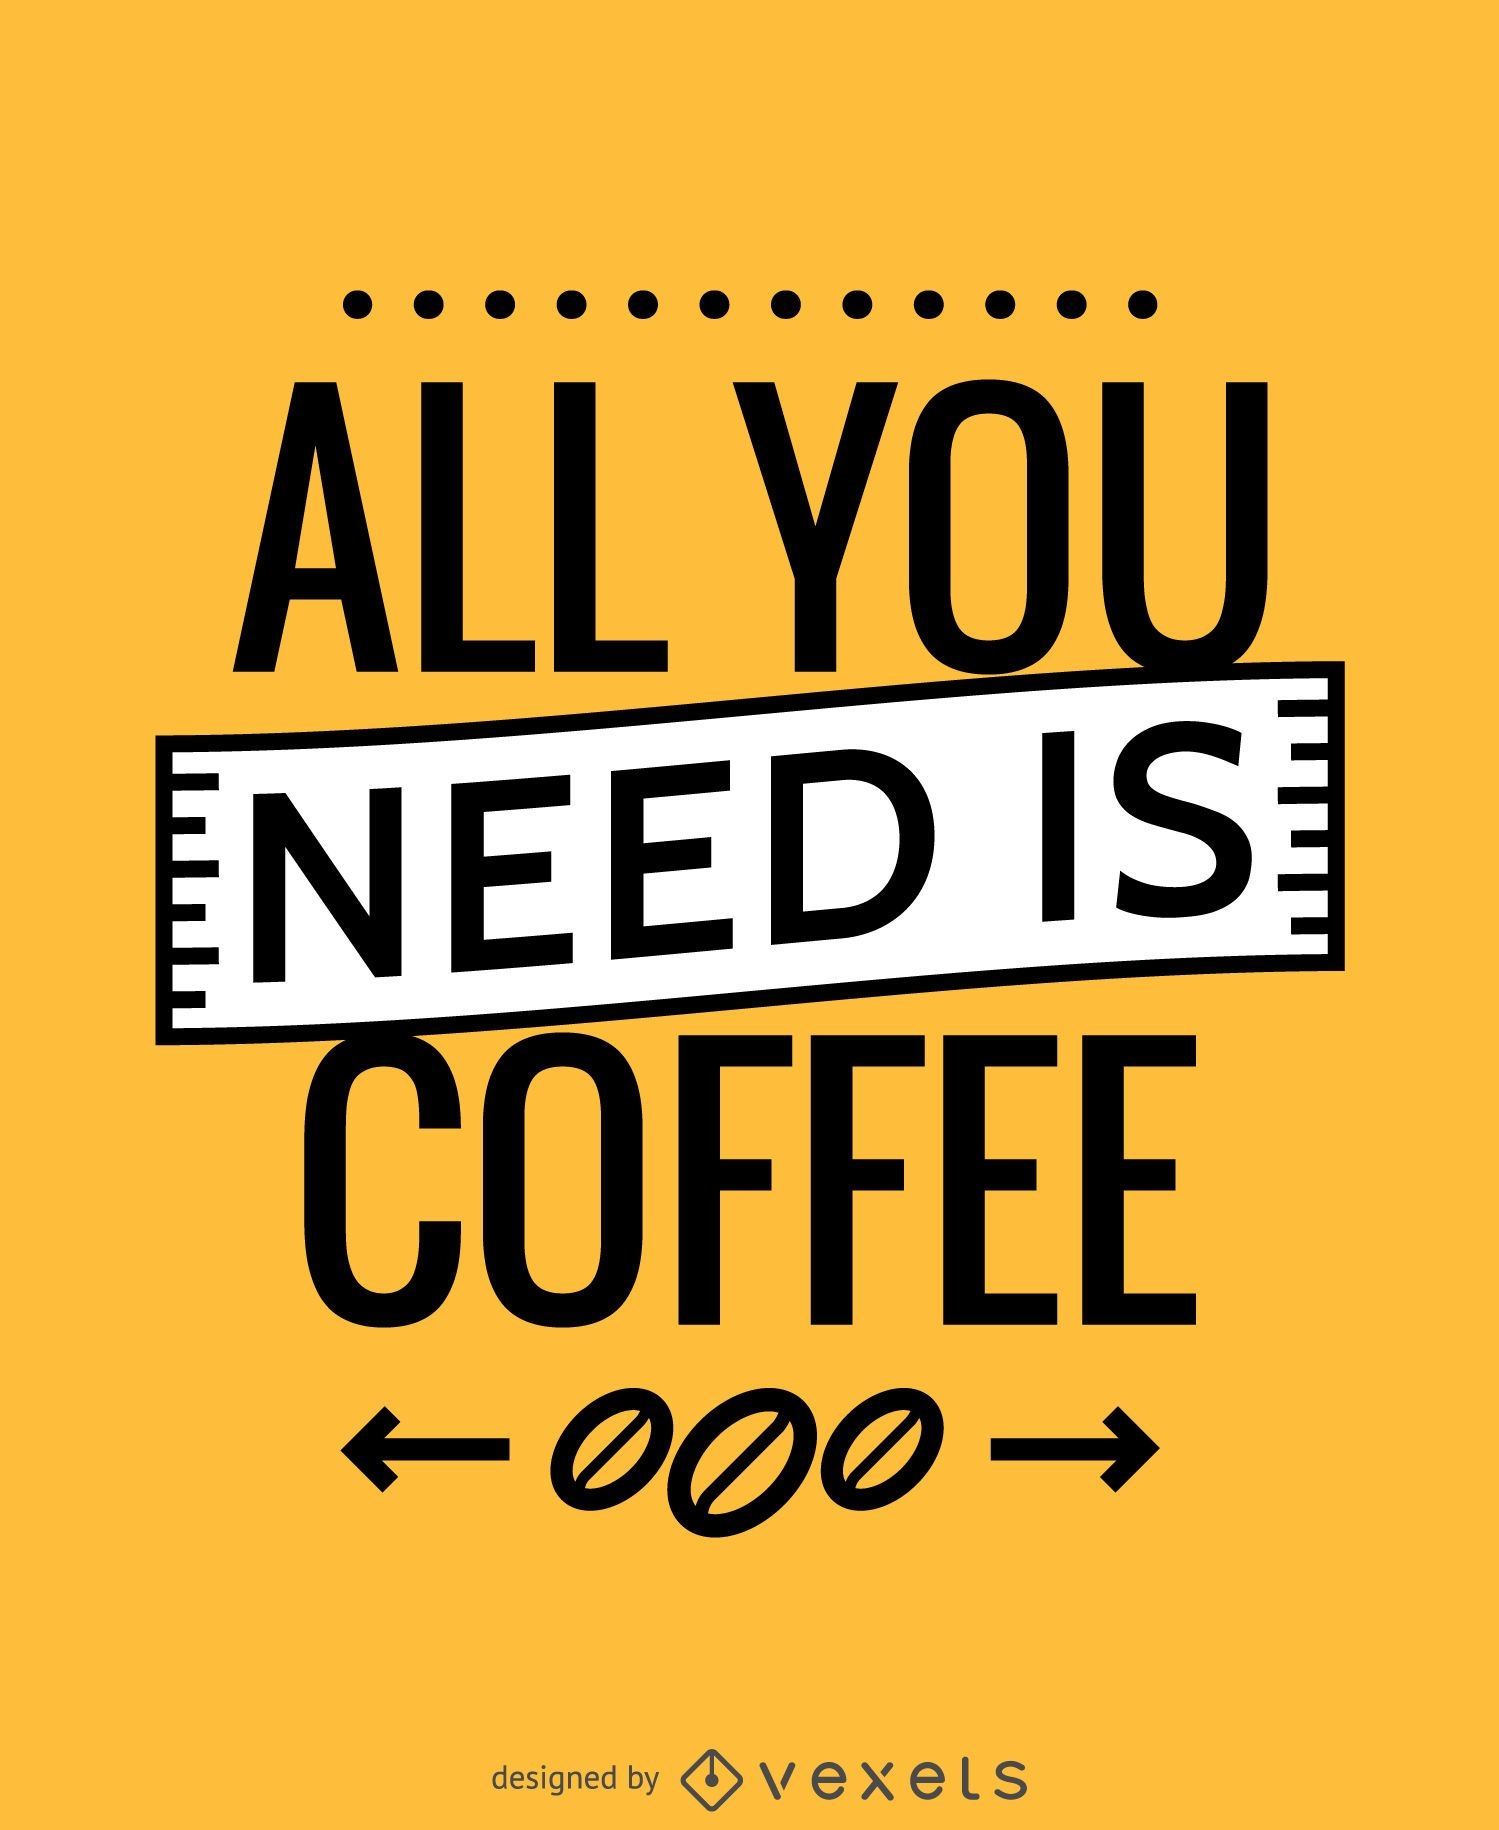 All you need is coffee illustration